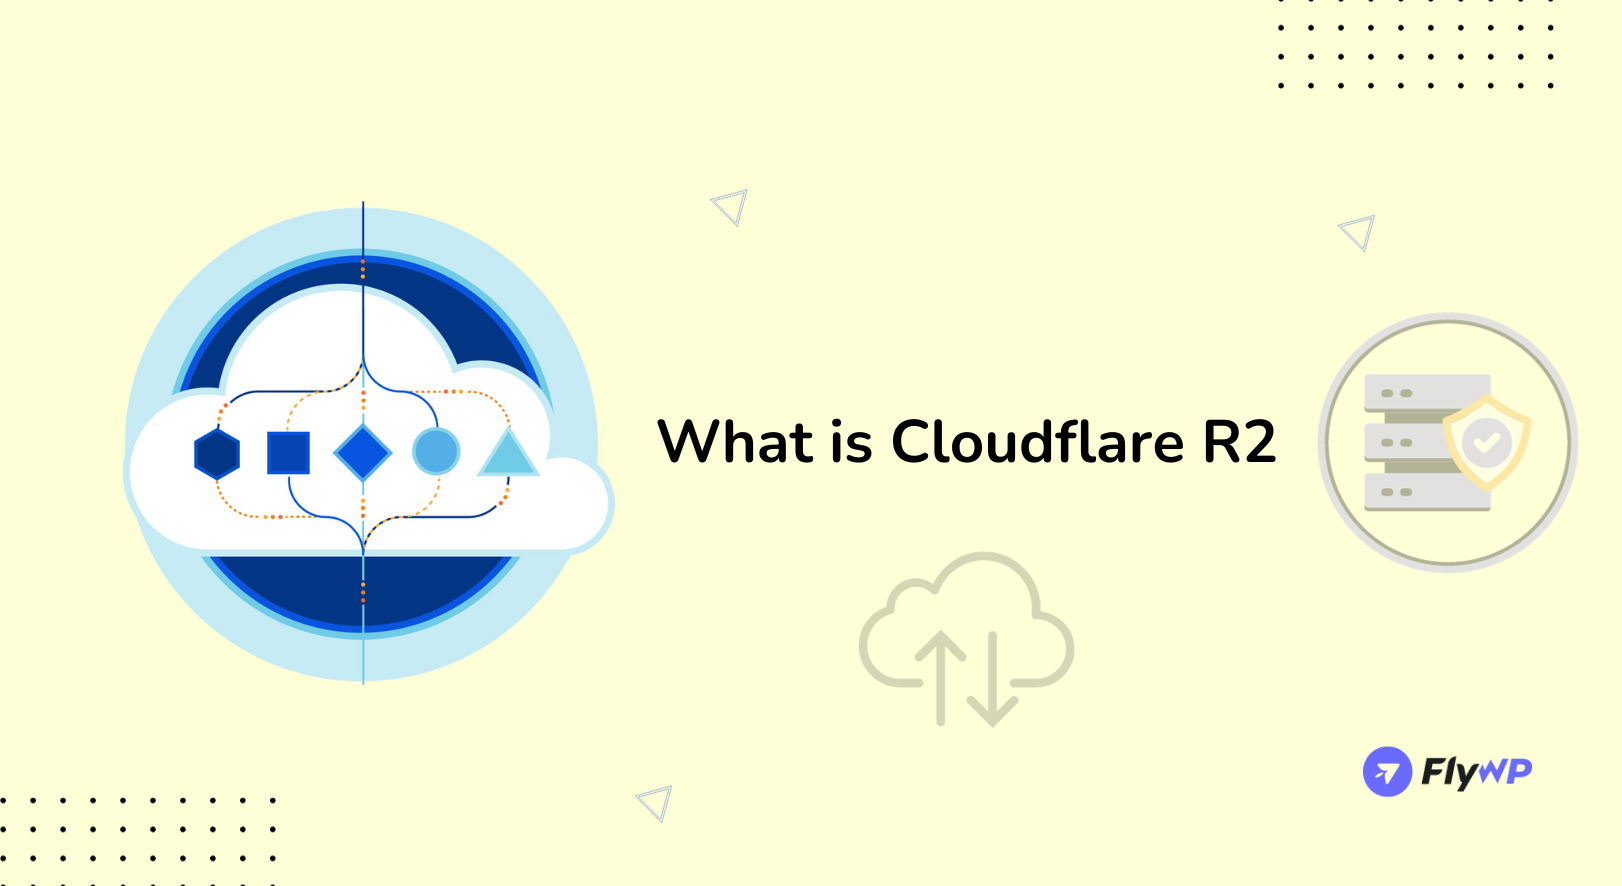 What is Cloudflare R2?